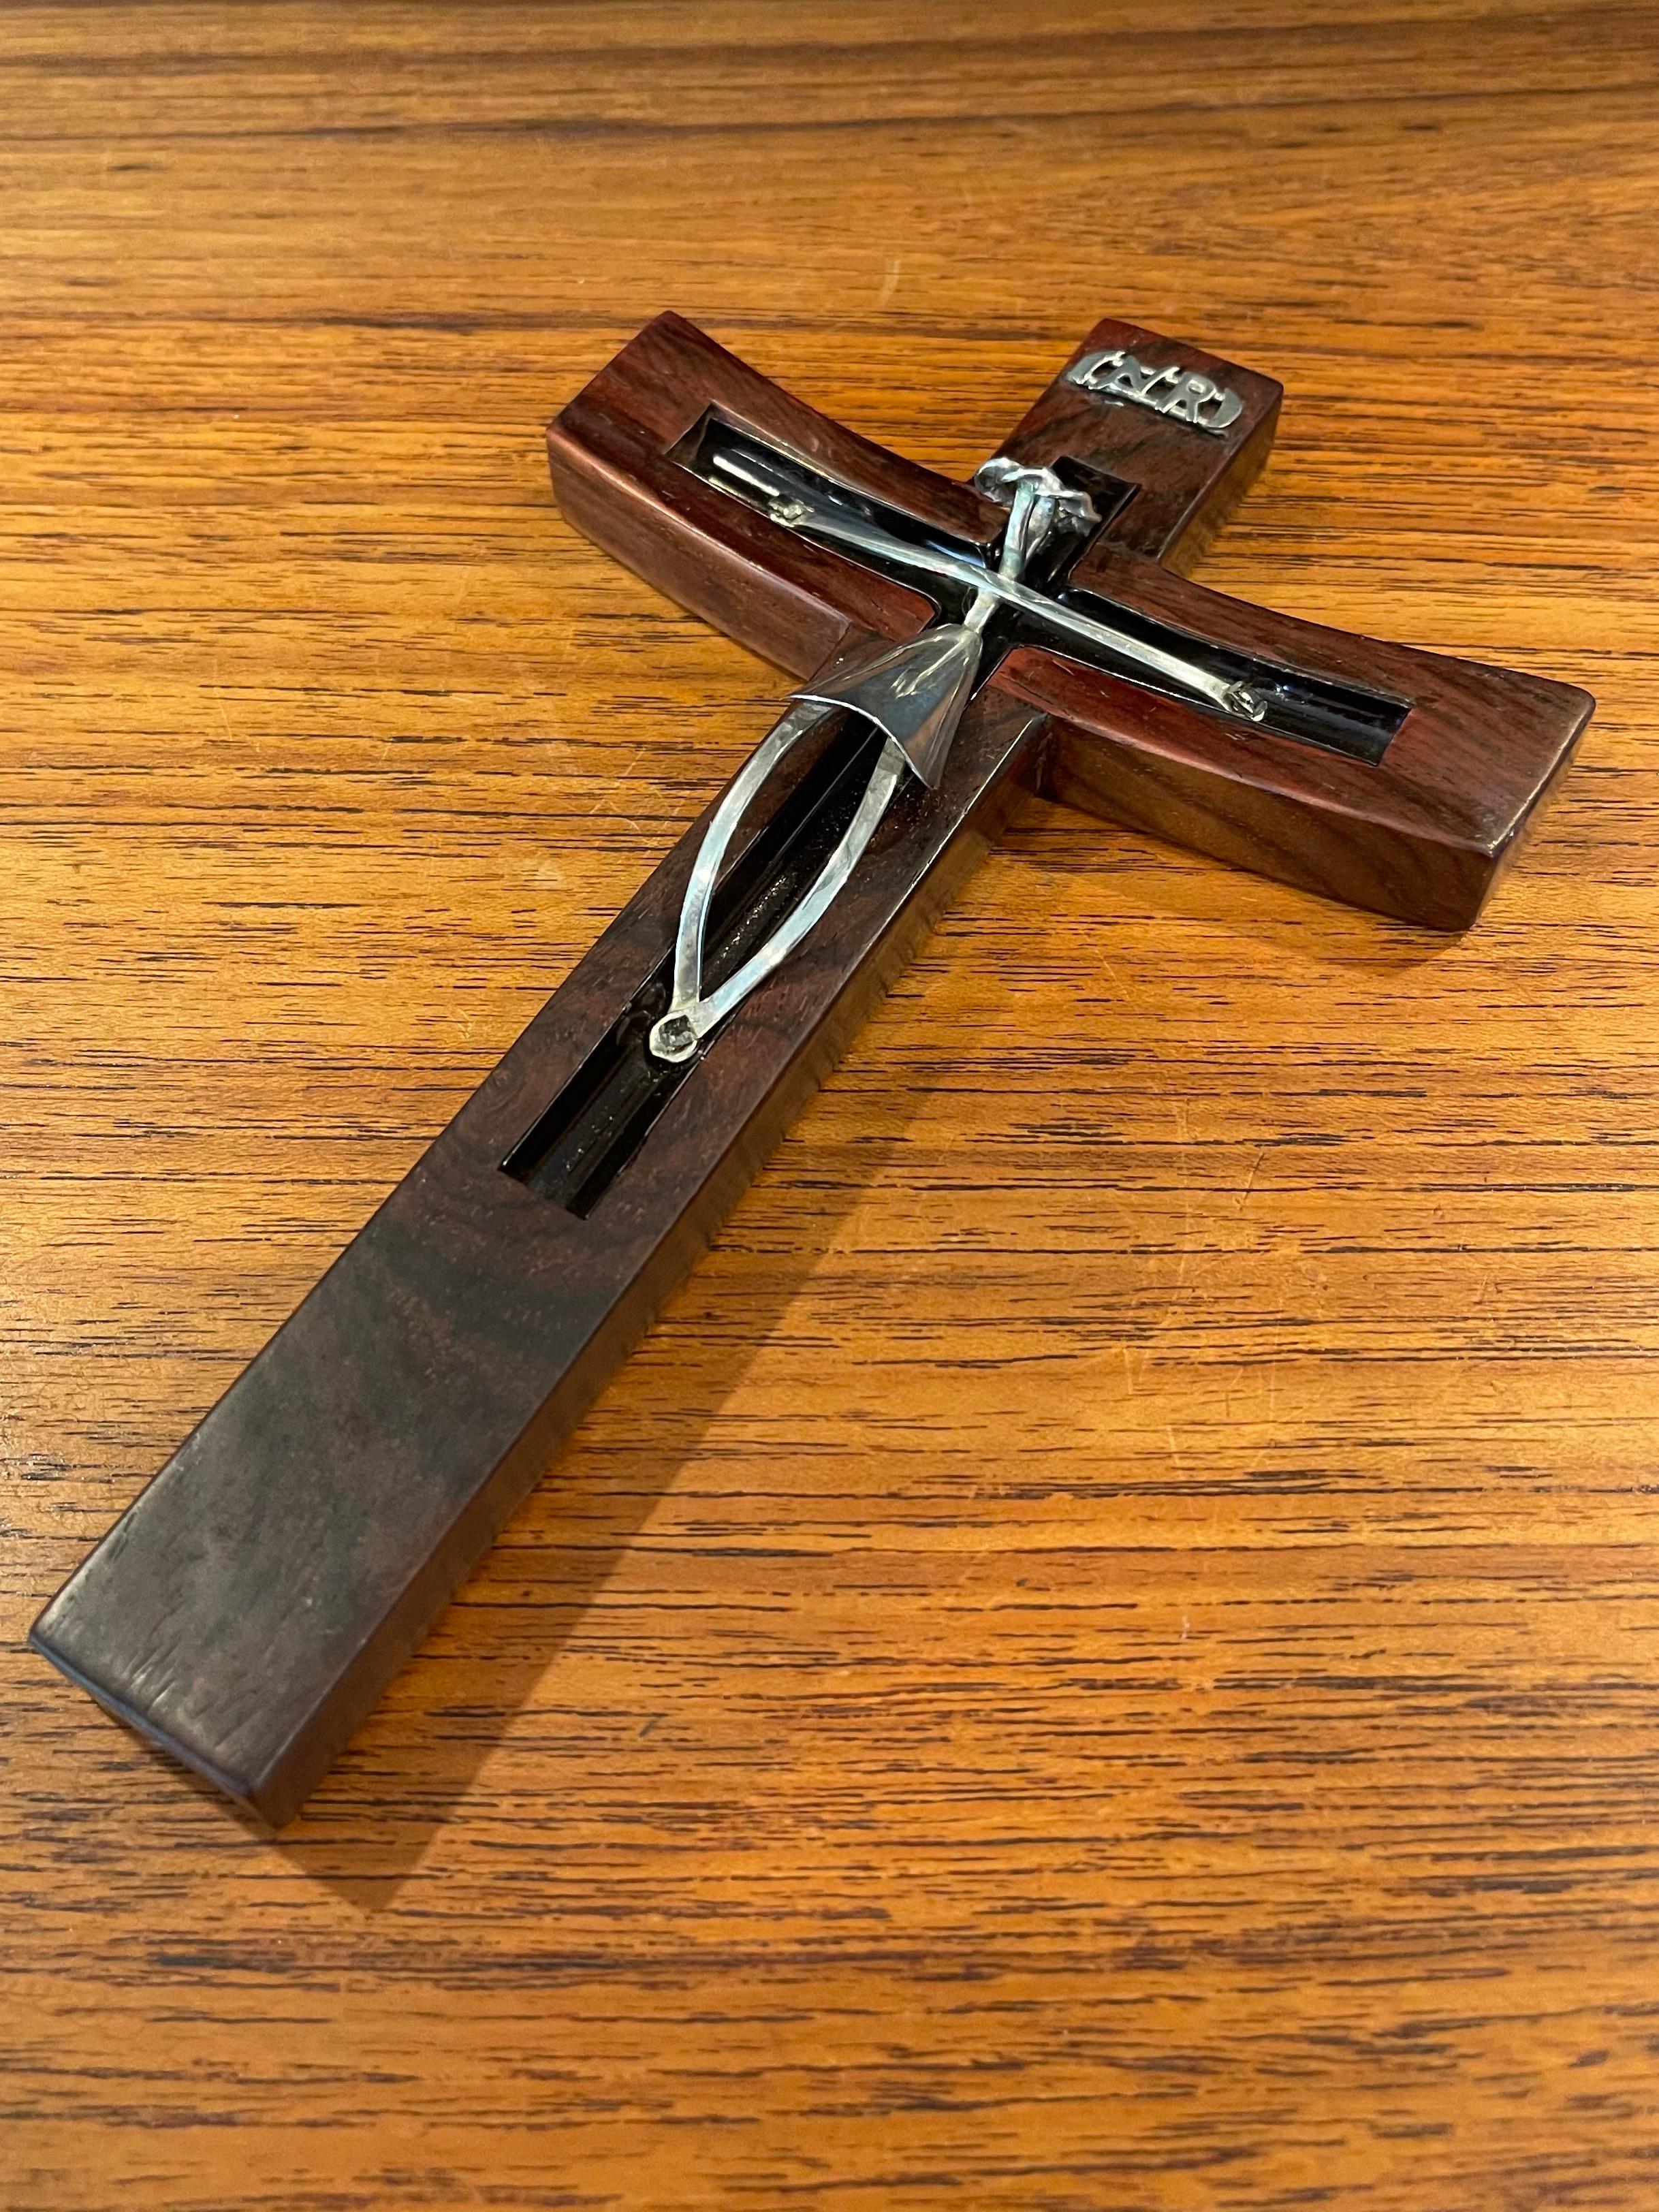 Modernist rosewood and sterling silver crucifix / cross by Taxco of Mexico, circa 1970s. The piece measures 7.75